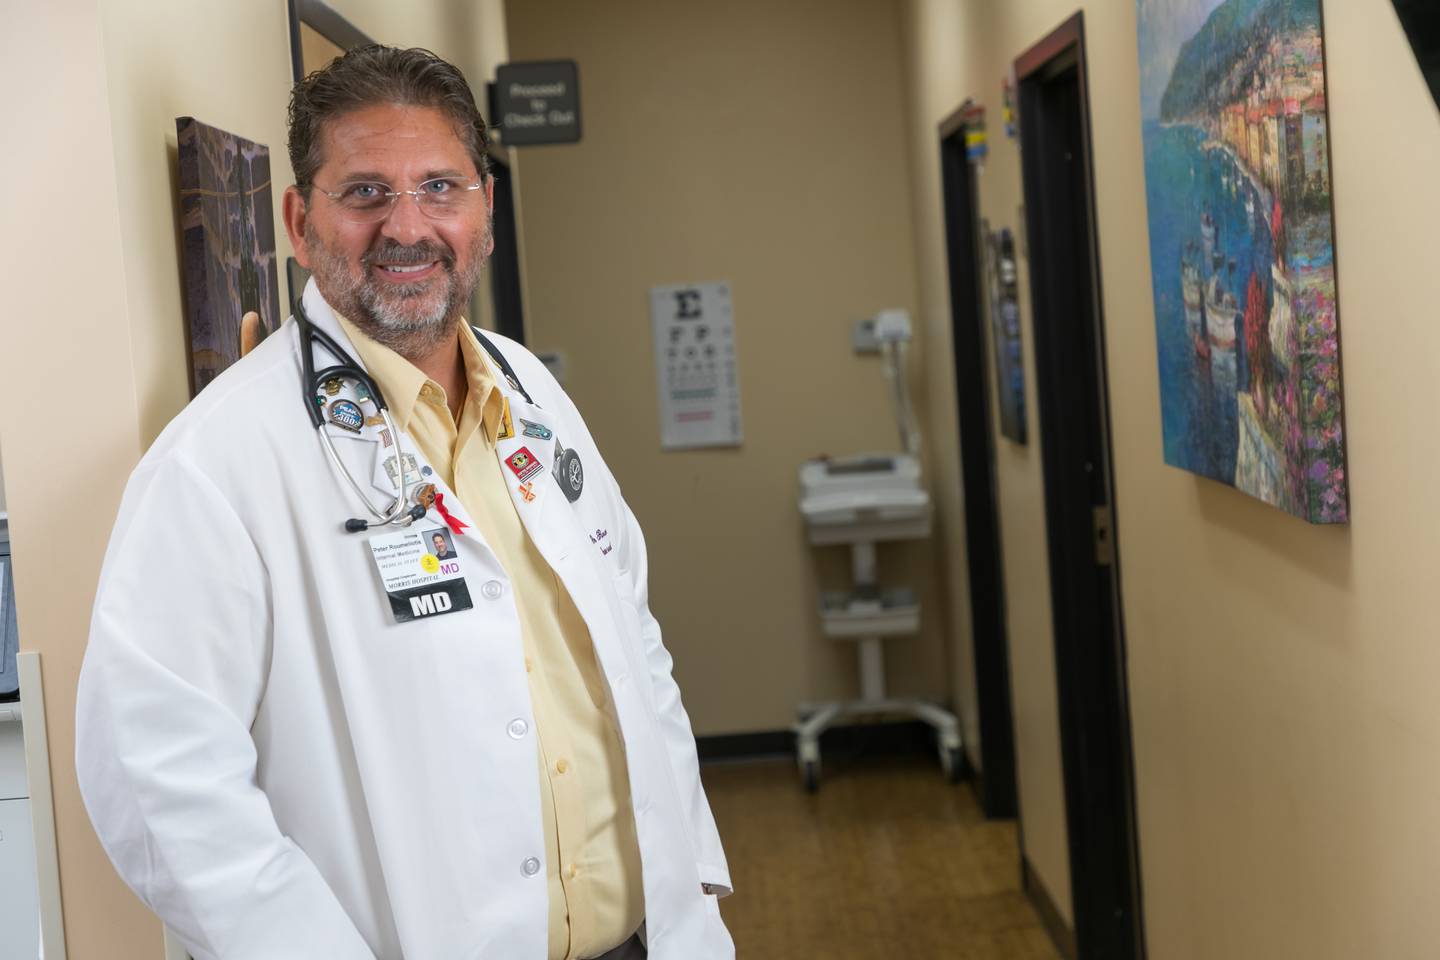 Dr. Peter Roumeliotis is an internal medicine physician with Morris Hospital & Healthcare Centers.